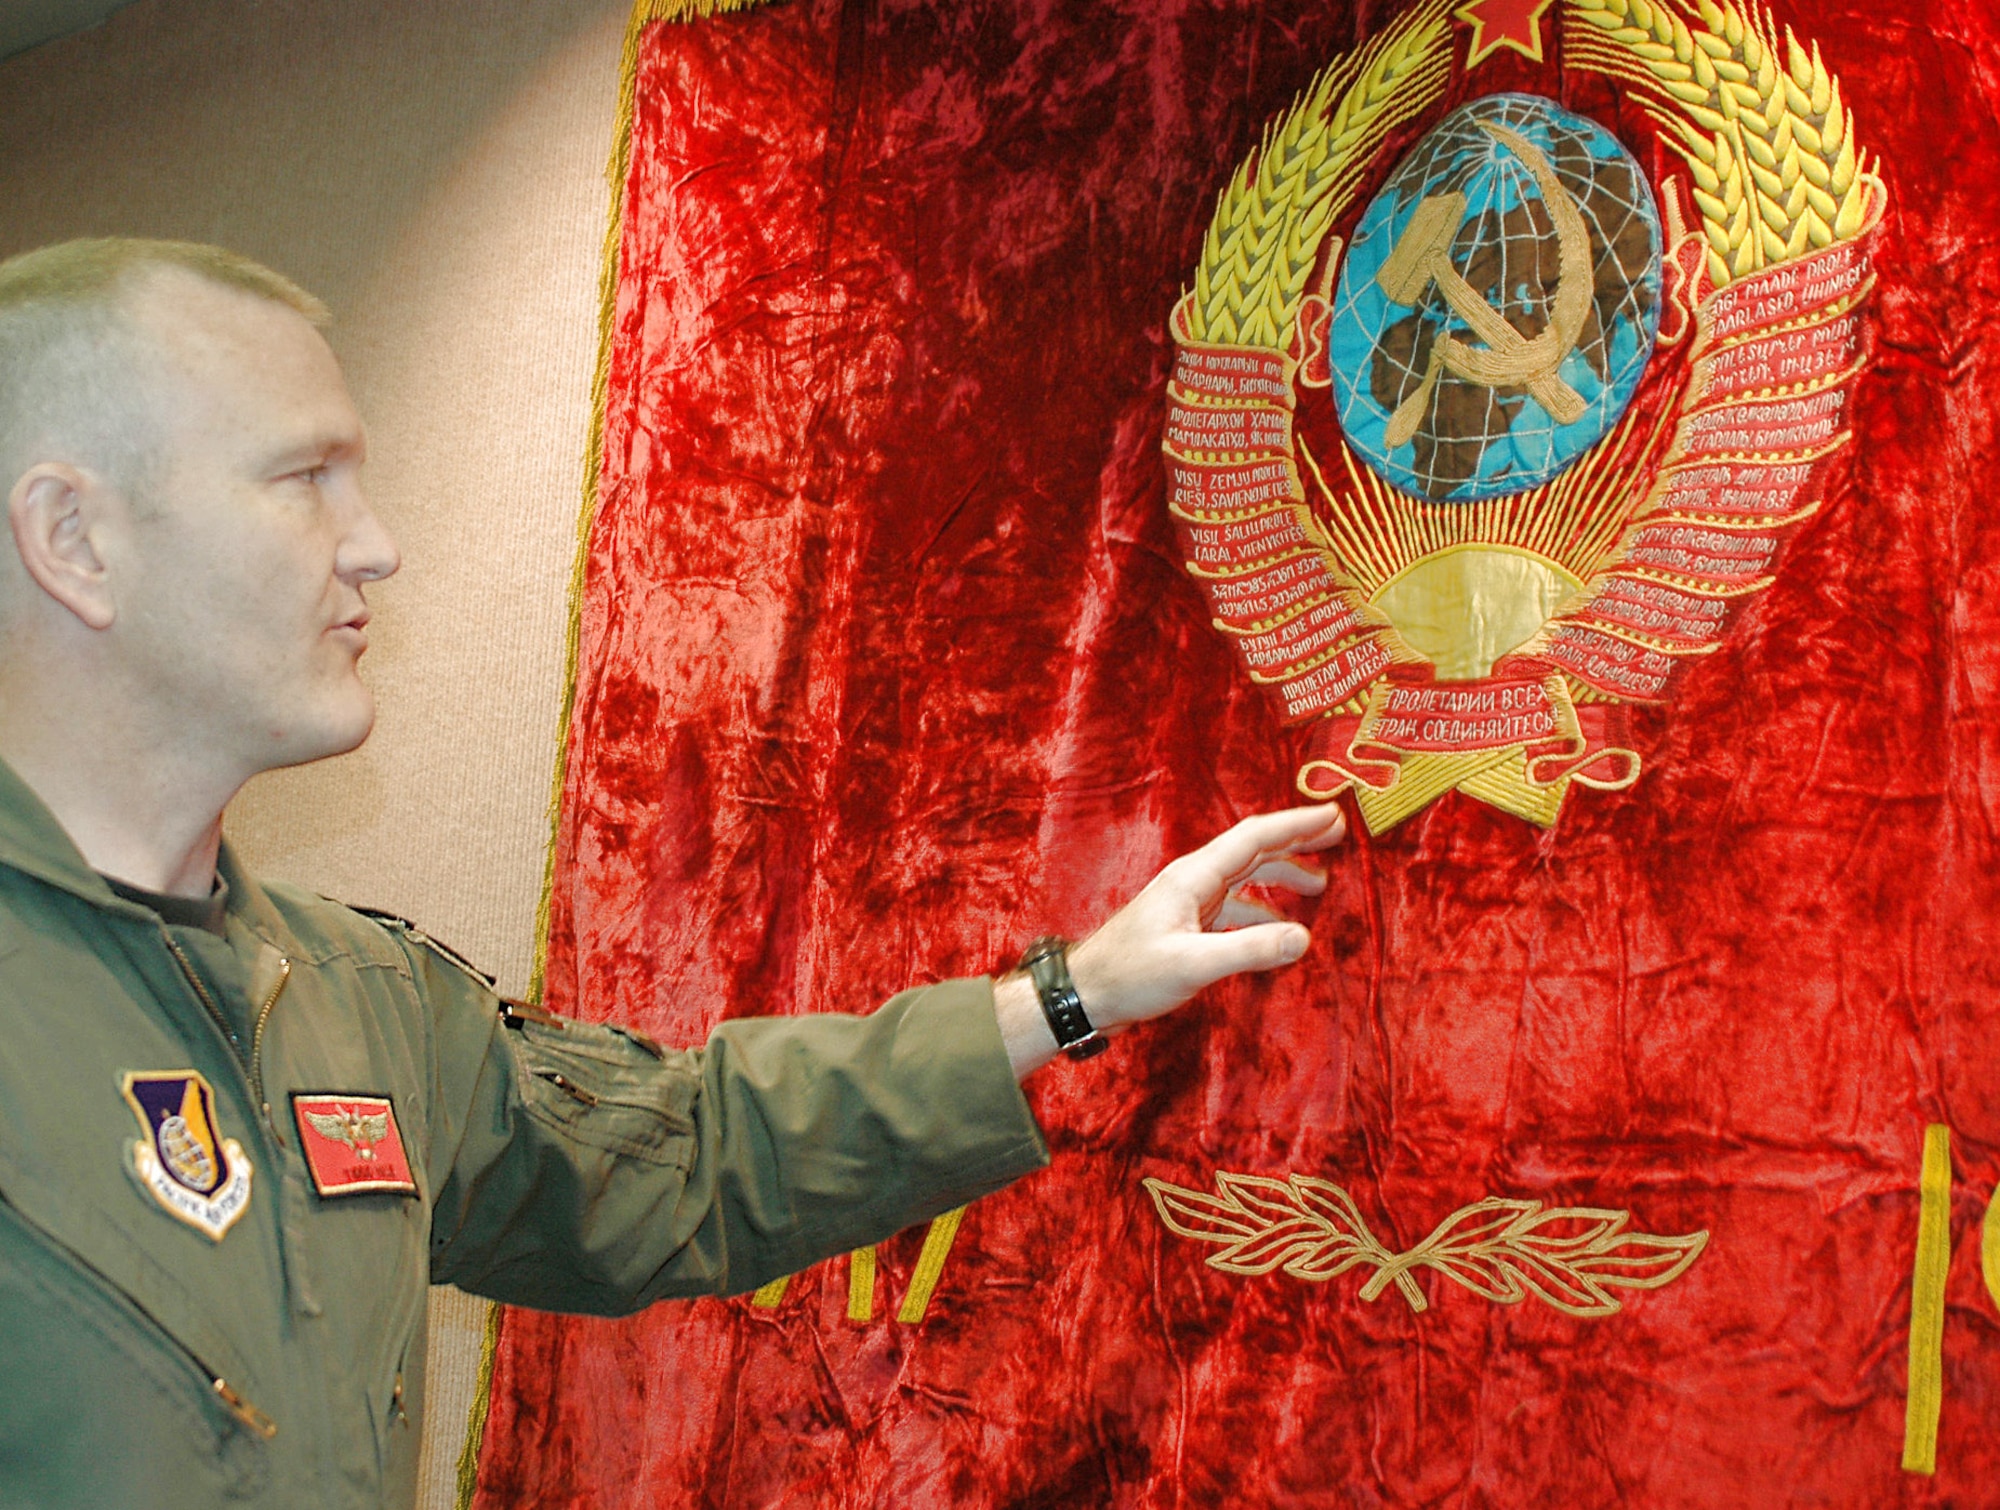 Capt. Todd Hale shows an authentic former Soviet Union flag displayed in the 18th Aggressor Squadron June 9 at Eielson Air Force Base, Alaska. The flag lends to the ambience pilots created to place themselves in the "enemy" mindset for Red Flag-Alaska 08-3. The 18th AGRS chose the pretense of the Soviet Union to emulate since they represented a past threat. Captain Hale is a pilot with the 18th AGRS who obtained the flag during the two years he spent in Russia as a missionary. (U.S. Air Force photo/Airman 1st Class Nora Anton)